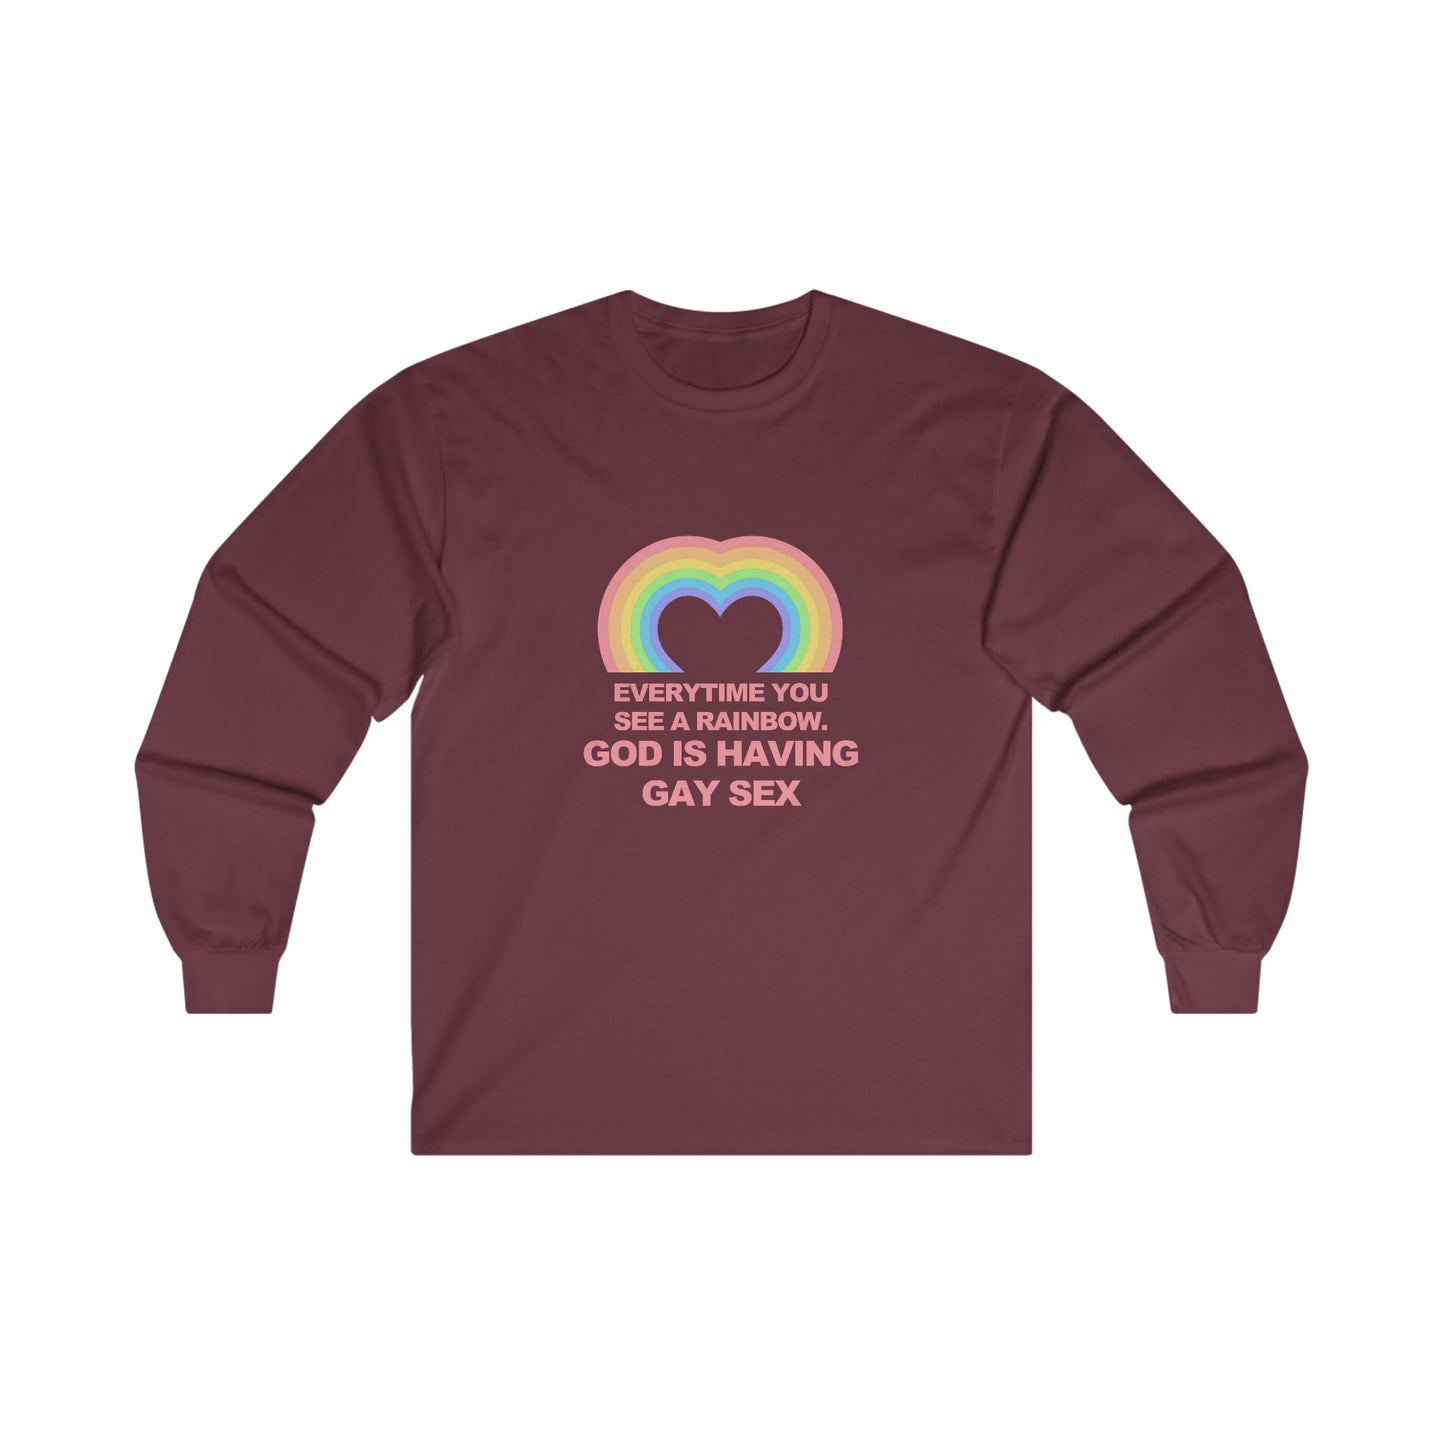 Everytime you see a rainbow, god is having gay sex Long Sleeve T-Shirt